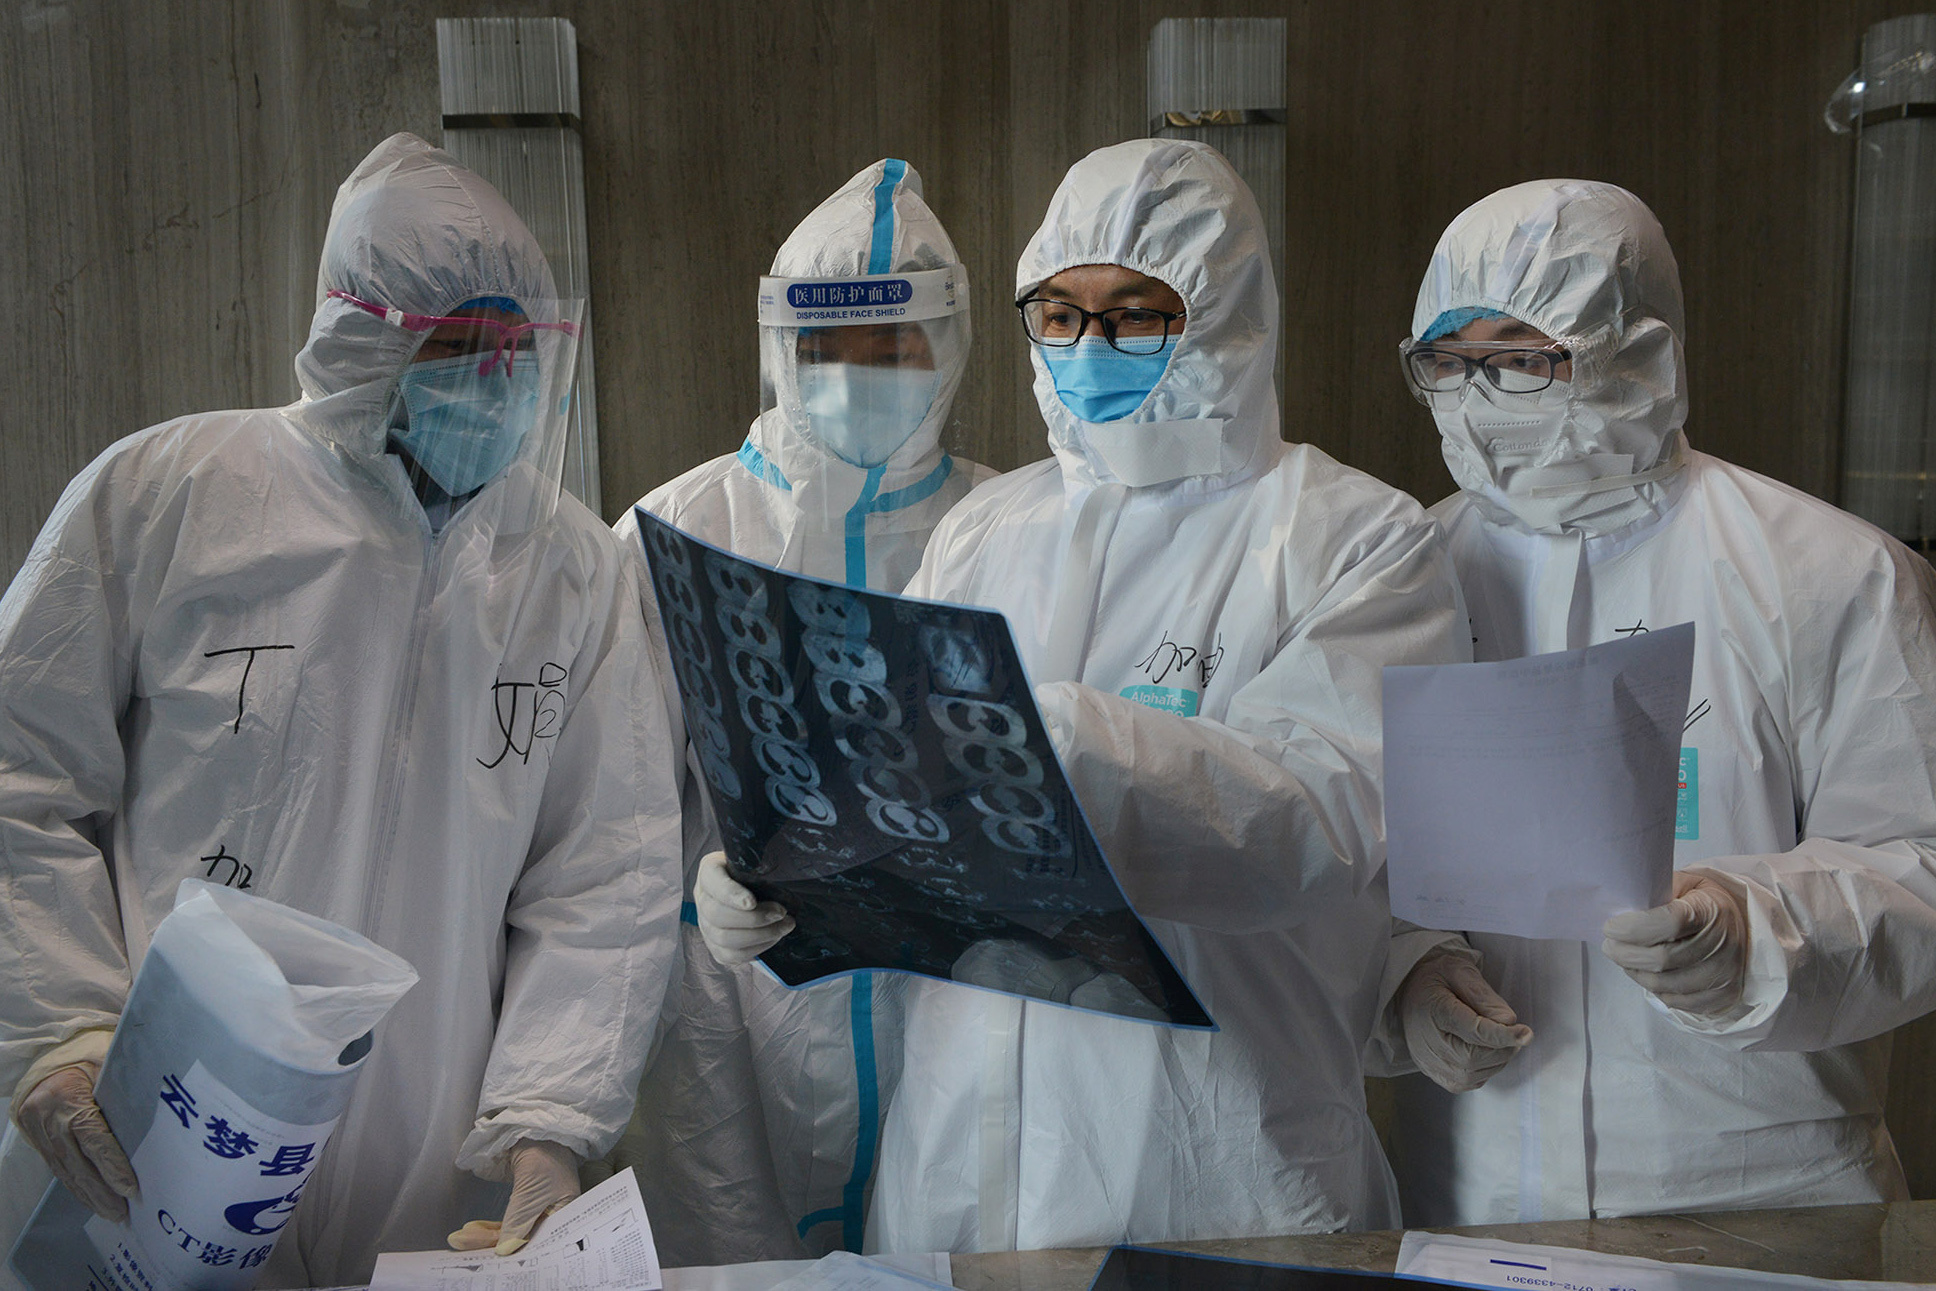 PHOTO: Medical workers in protective suits inspect a CT scan image at a hospital in Yunmeng county of Xiaogan city in Hubei, the province hit hardest by the novel coronavirus outbreak, China, Feb. 20, 2020.